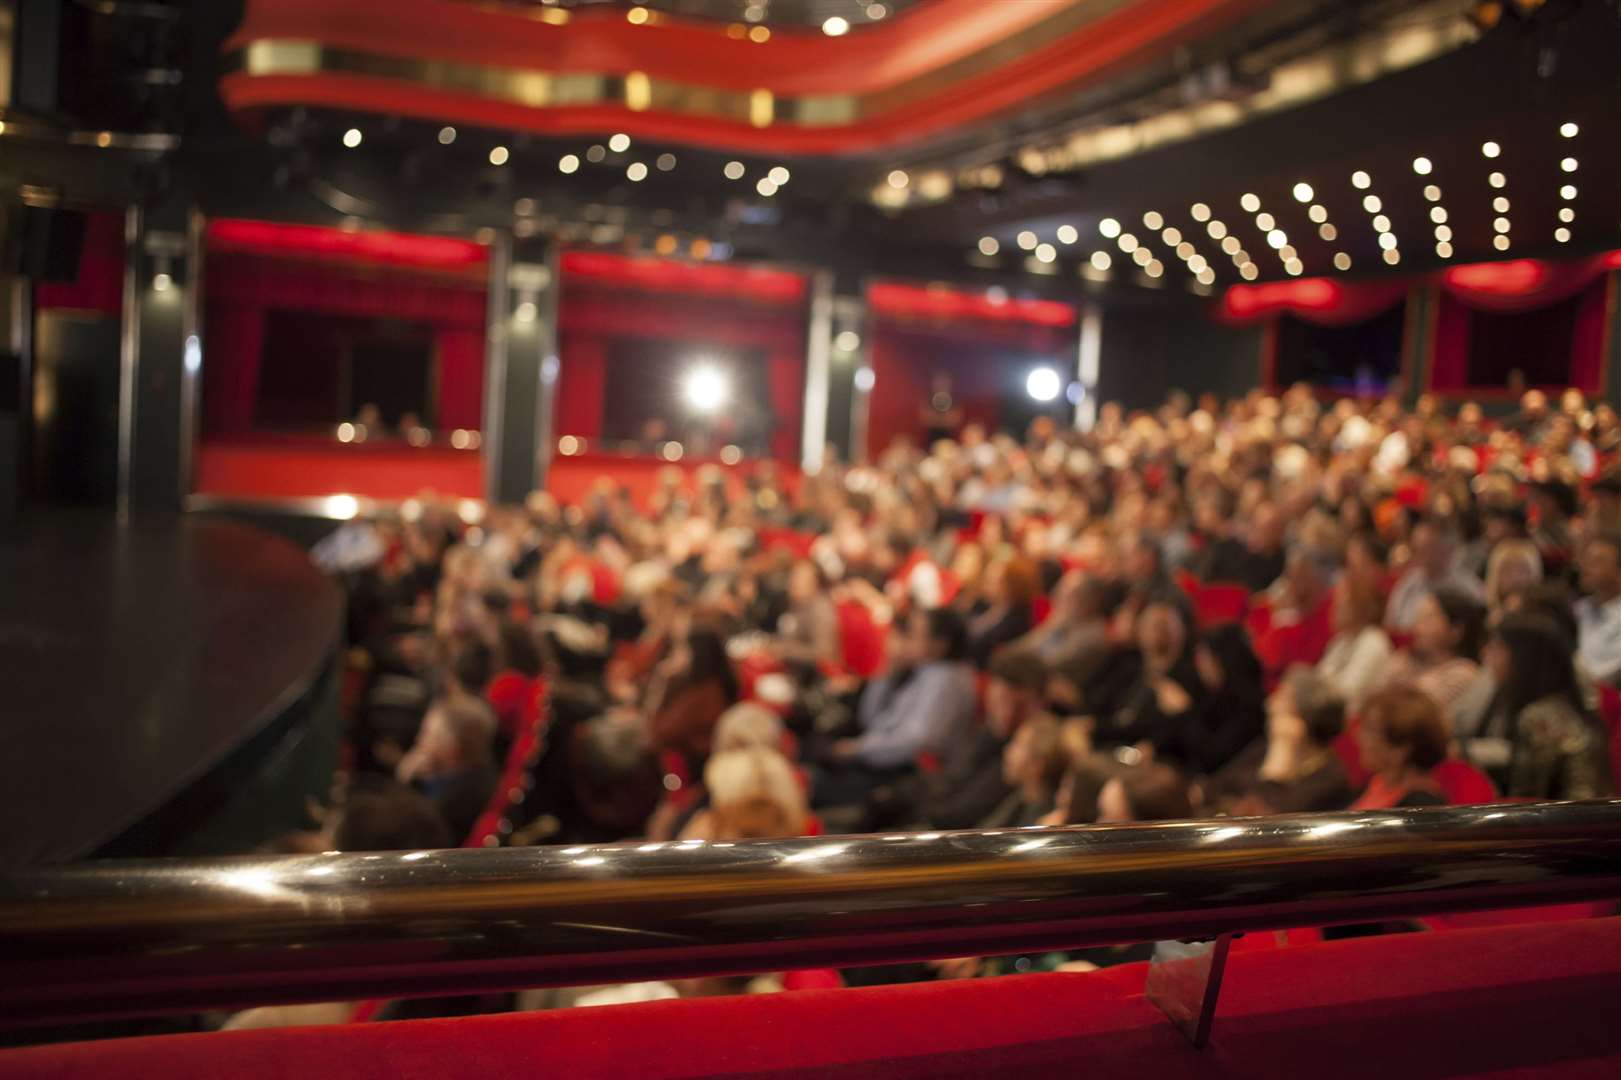 Has the behaviour of audiences got worse since the pandemic? Image: Stock photo.